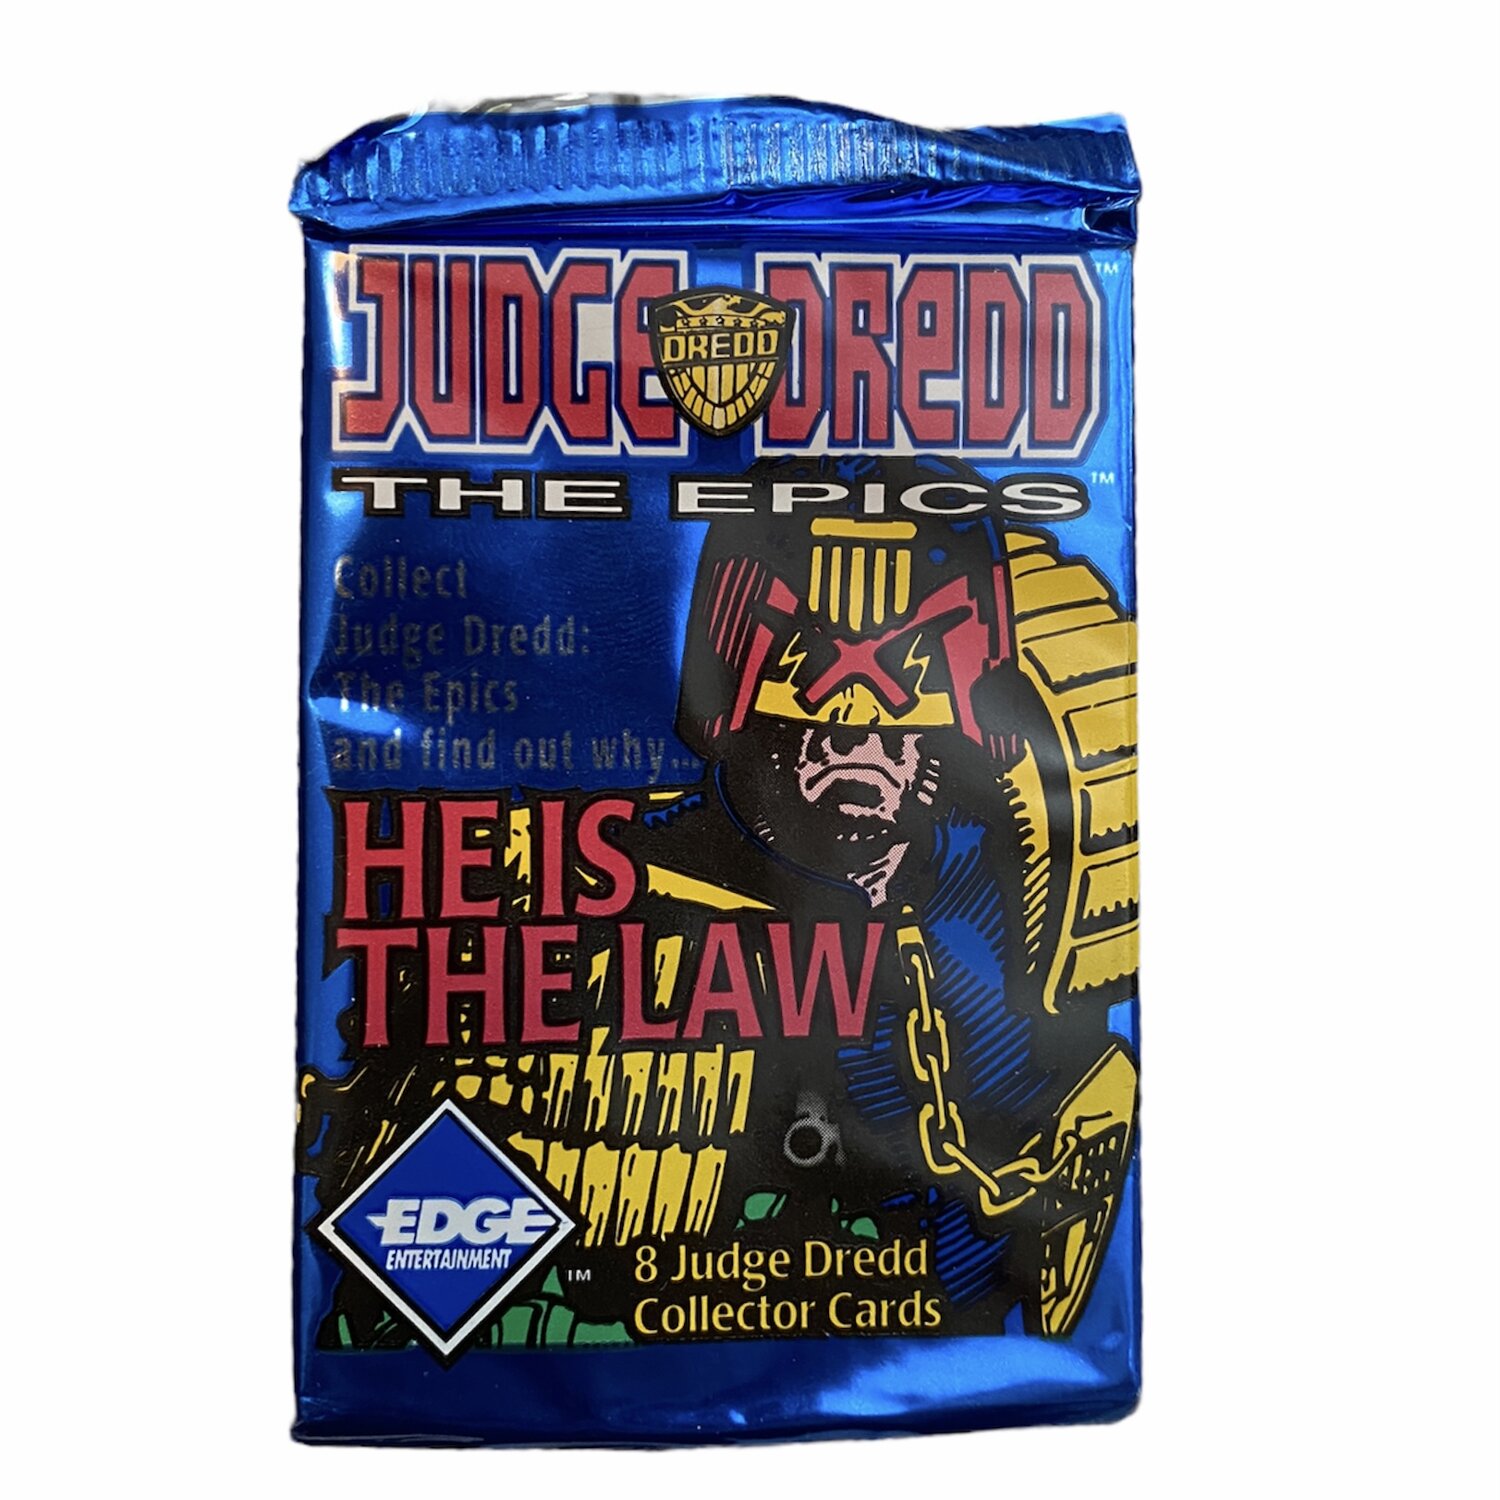 JUDGE DREDD SEALED BOX OF COLLECTORS CARDS MADE BY EDGE IN 1995 